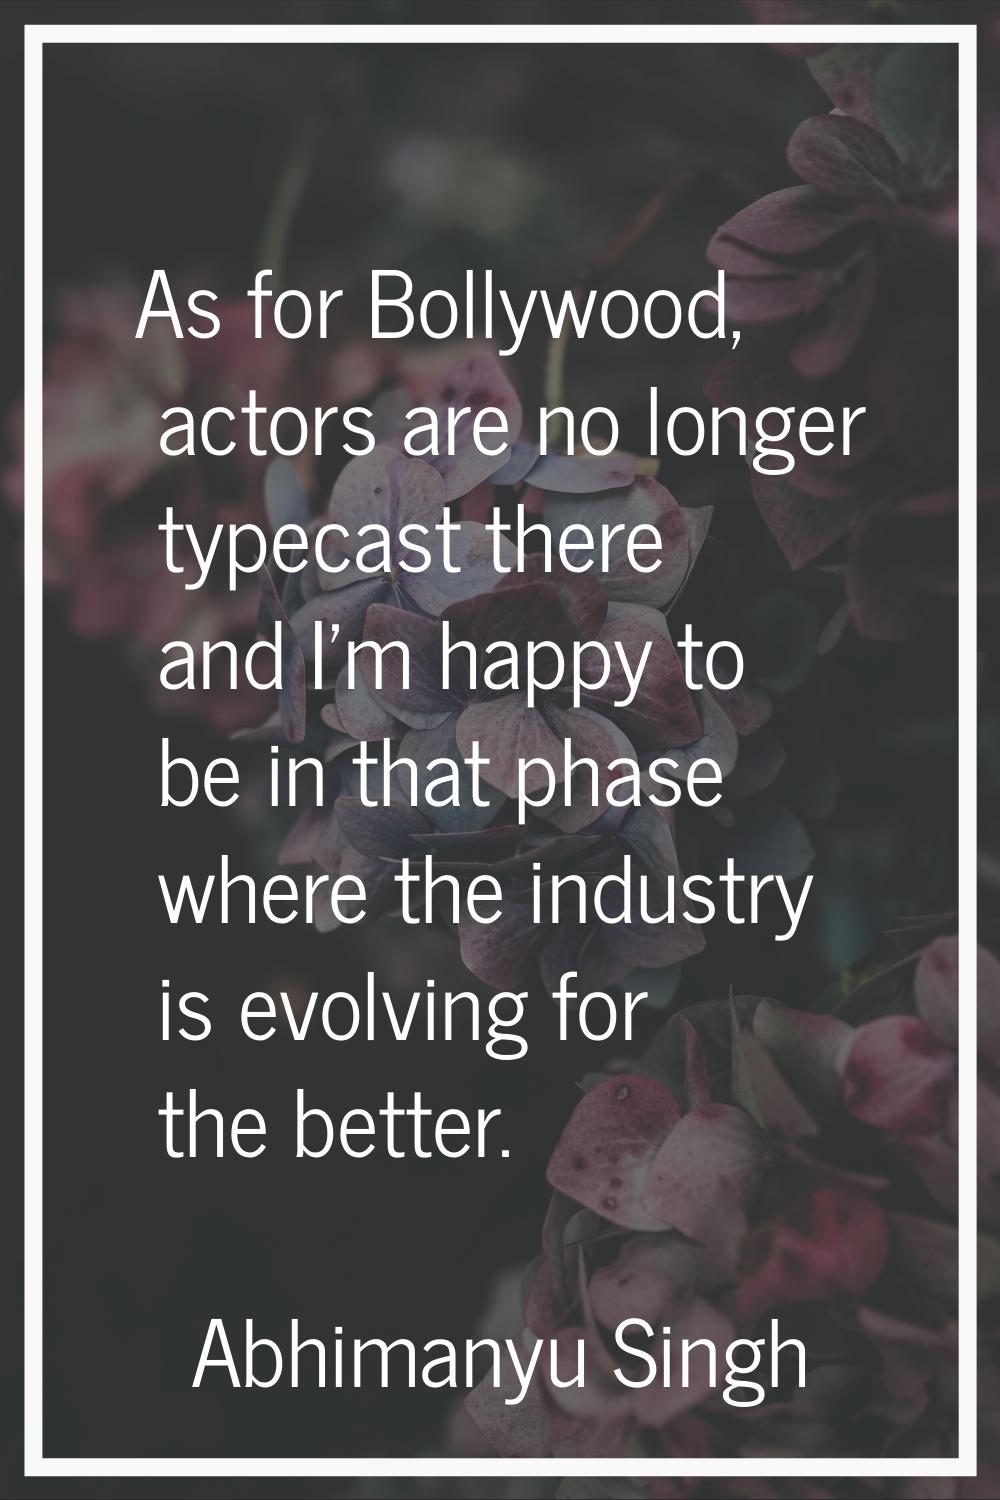 As for Bollywood, actors are no longer typecast there and I'm happy to be in that phase where the i